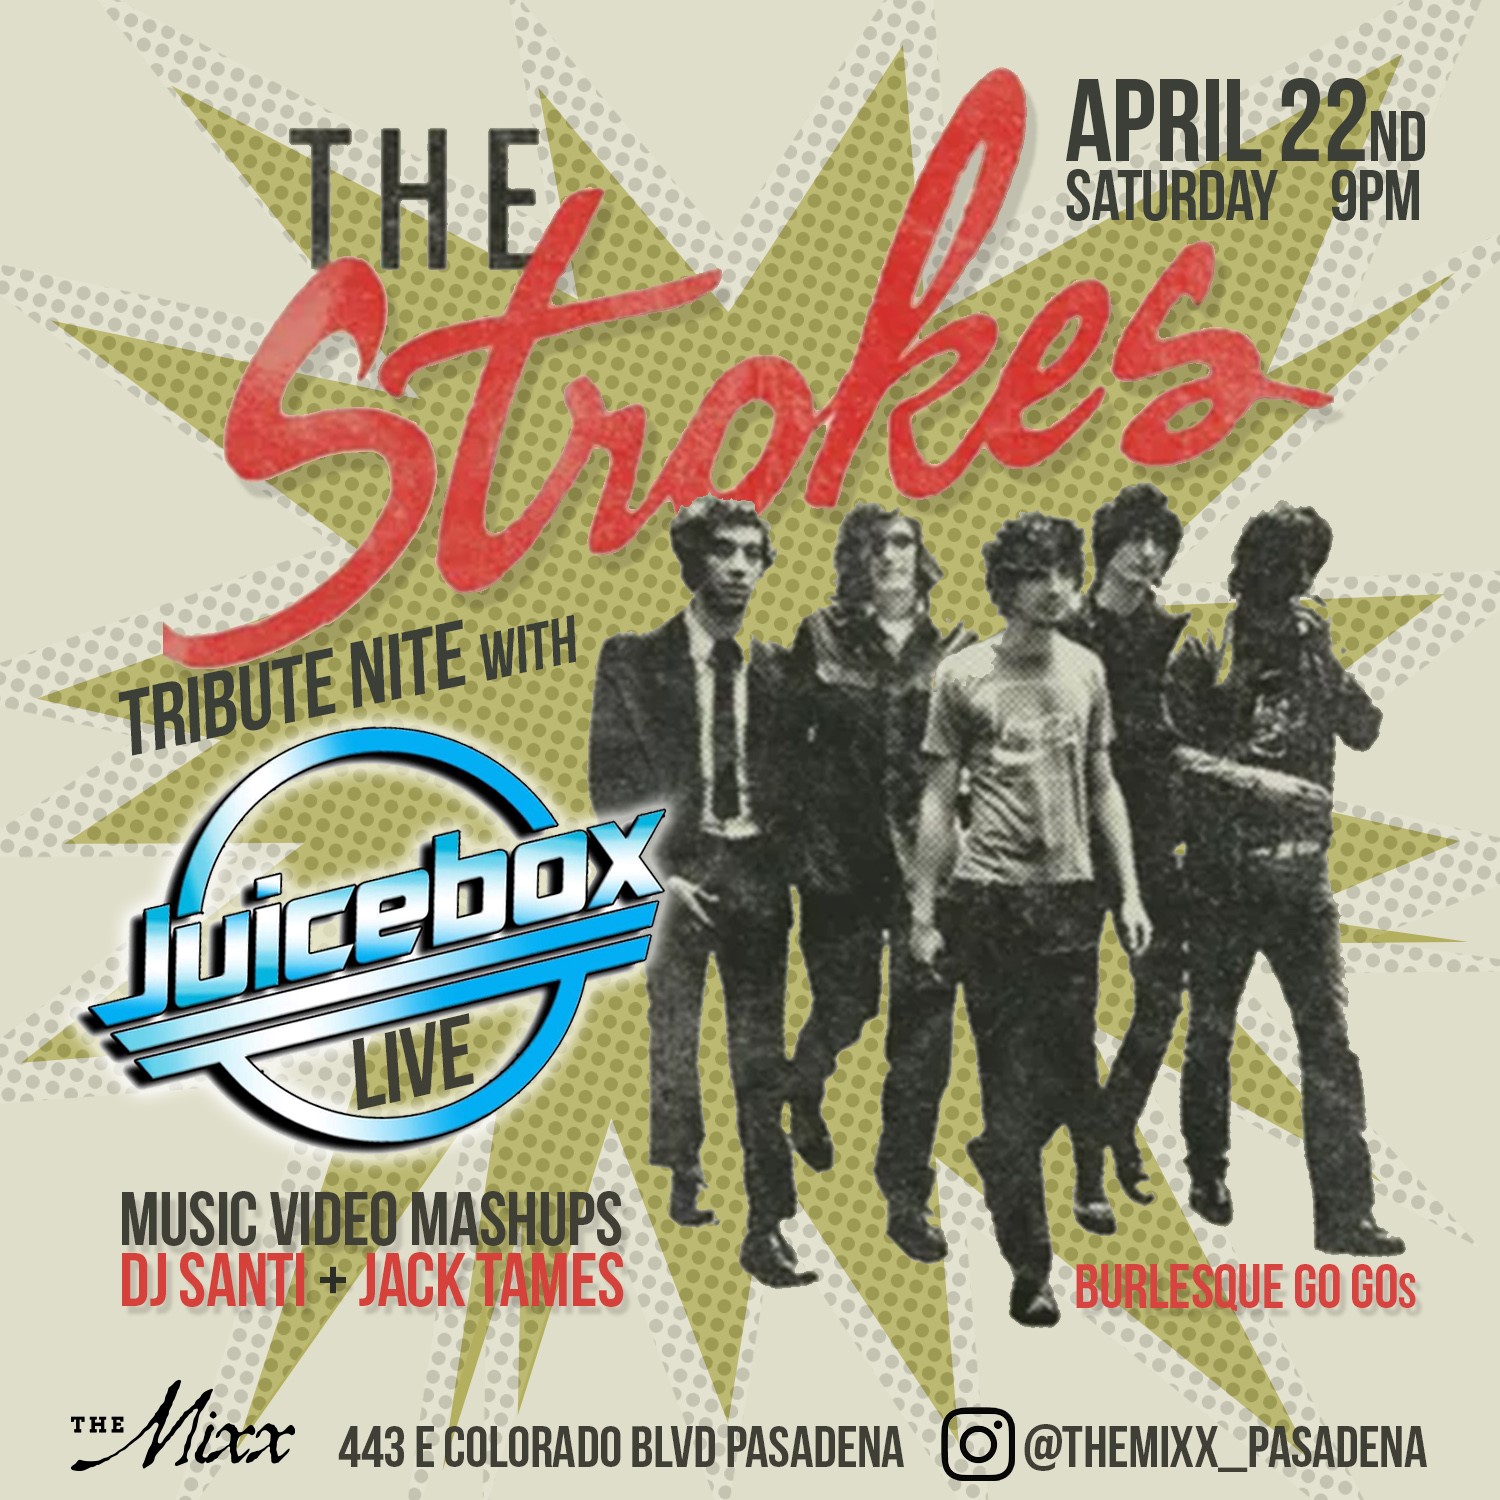 You are currently viewing The Strokes LIVE TRIBUTE Indie Night